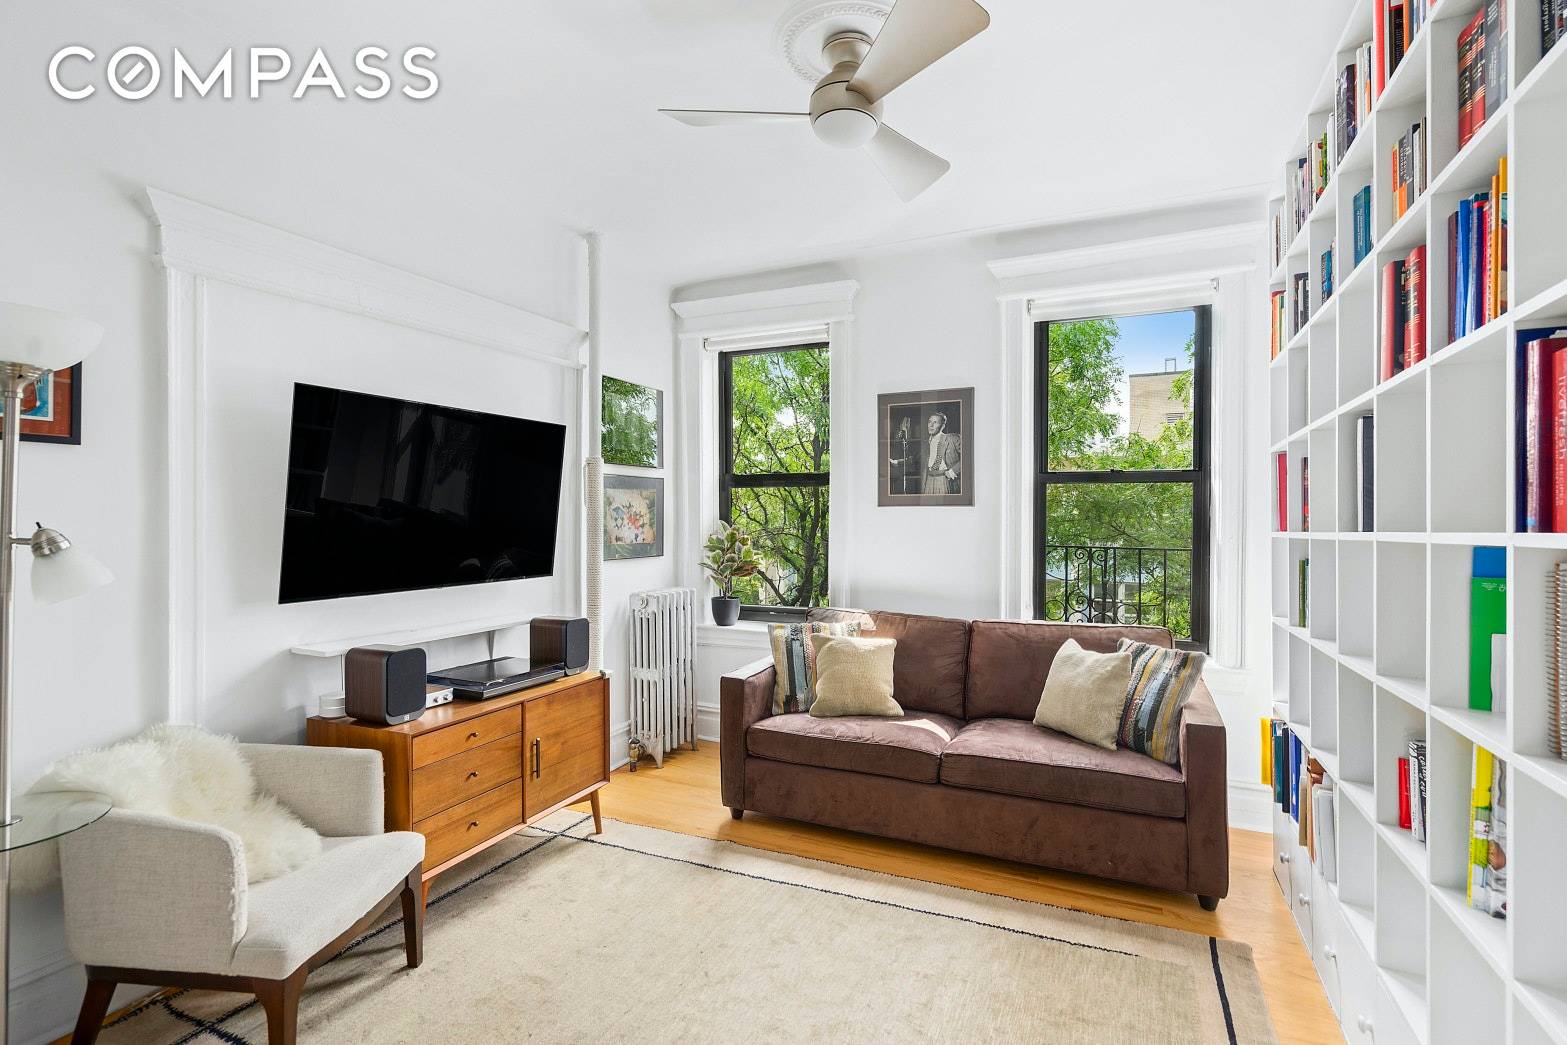 A bright and inviting 2 bedroom, 1 bath residence at 467 Pacific Street, a coveted co op building situated on one of the loveliest tree lined blocks in Brooklyn.